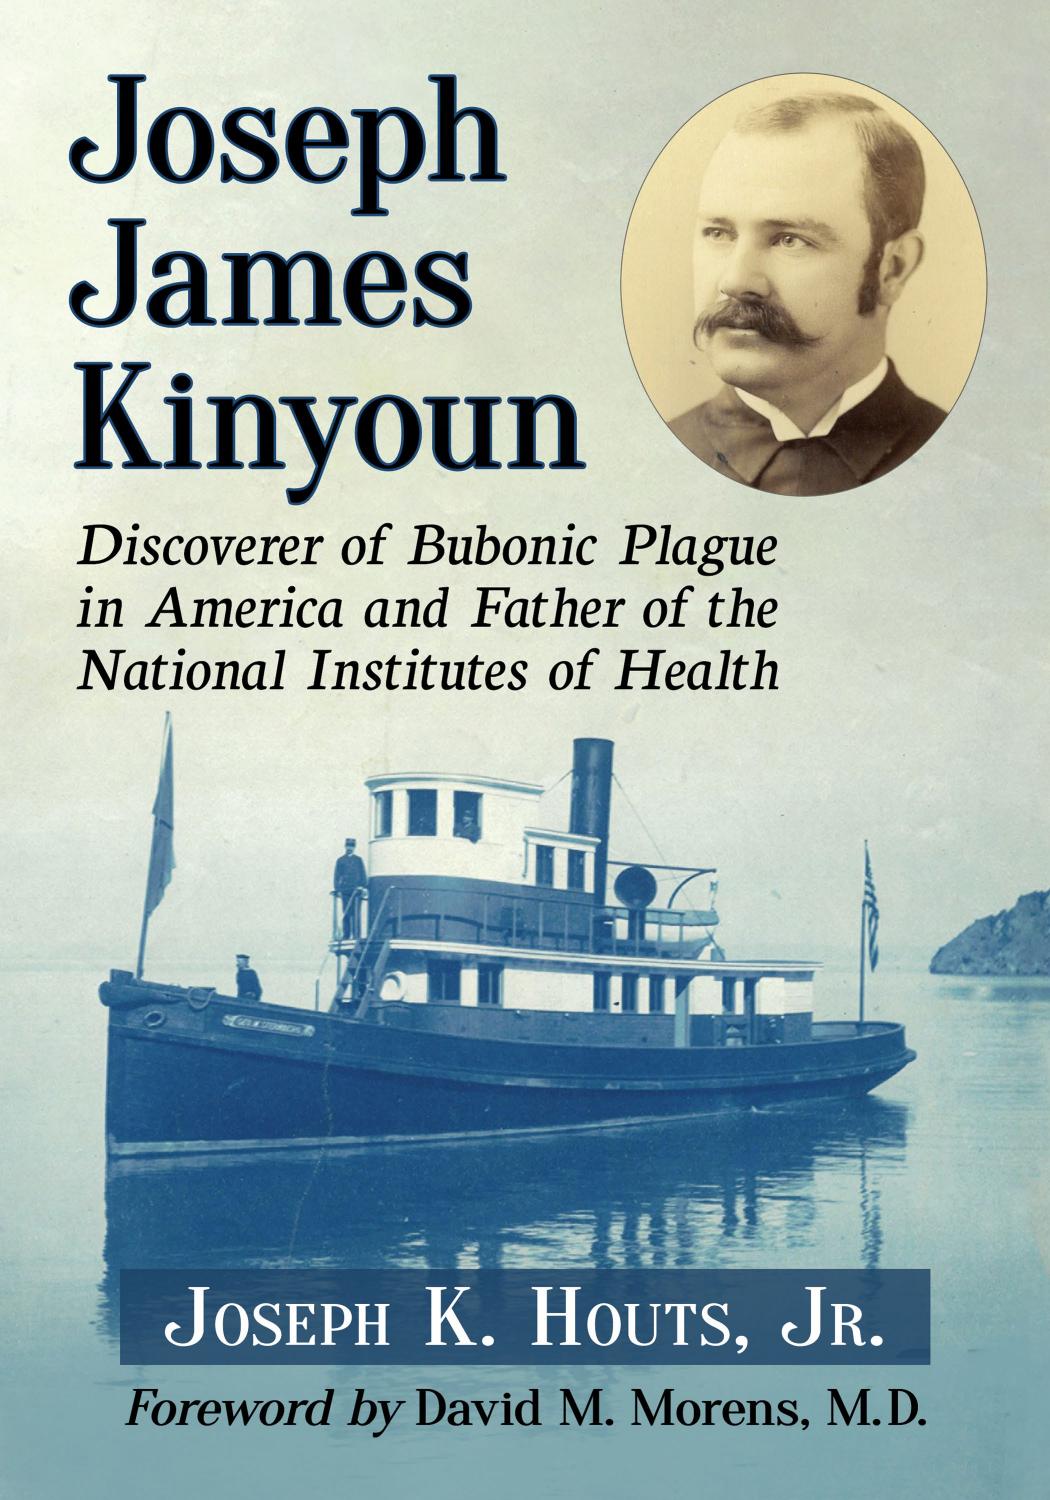 Joseph James Kinyoun: Discoverer of Bubonic Plague in America and Father of the National Institutes of Health by Joseph K. Houts Jr